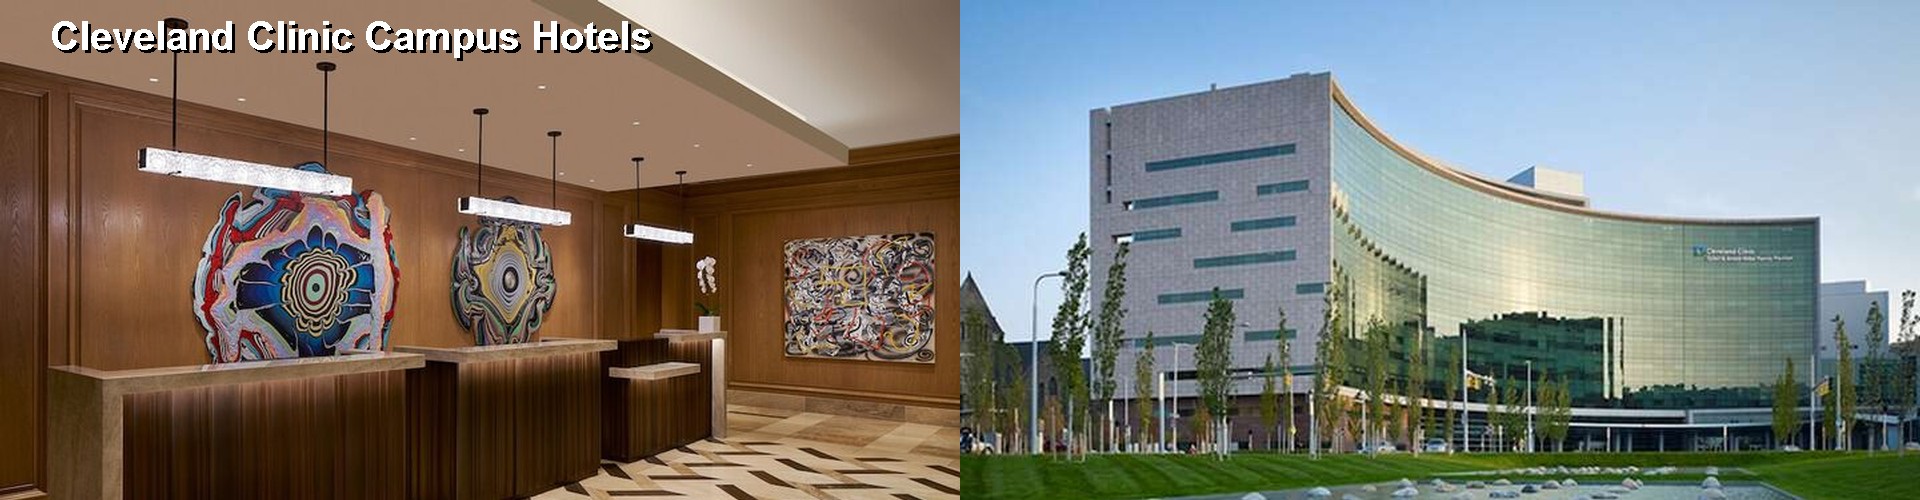 5 Best Hotels near Cleveland Clinic Campus